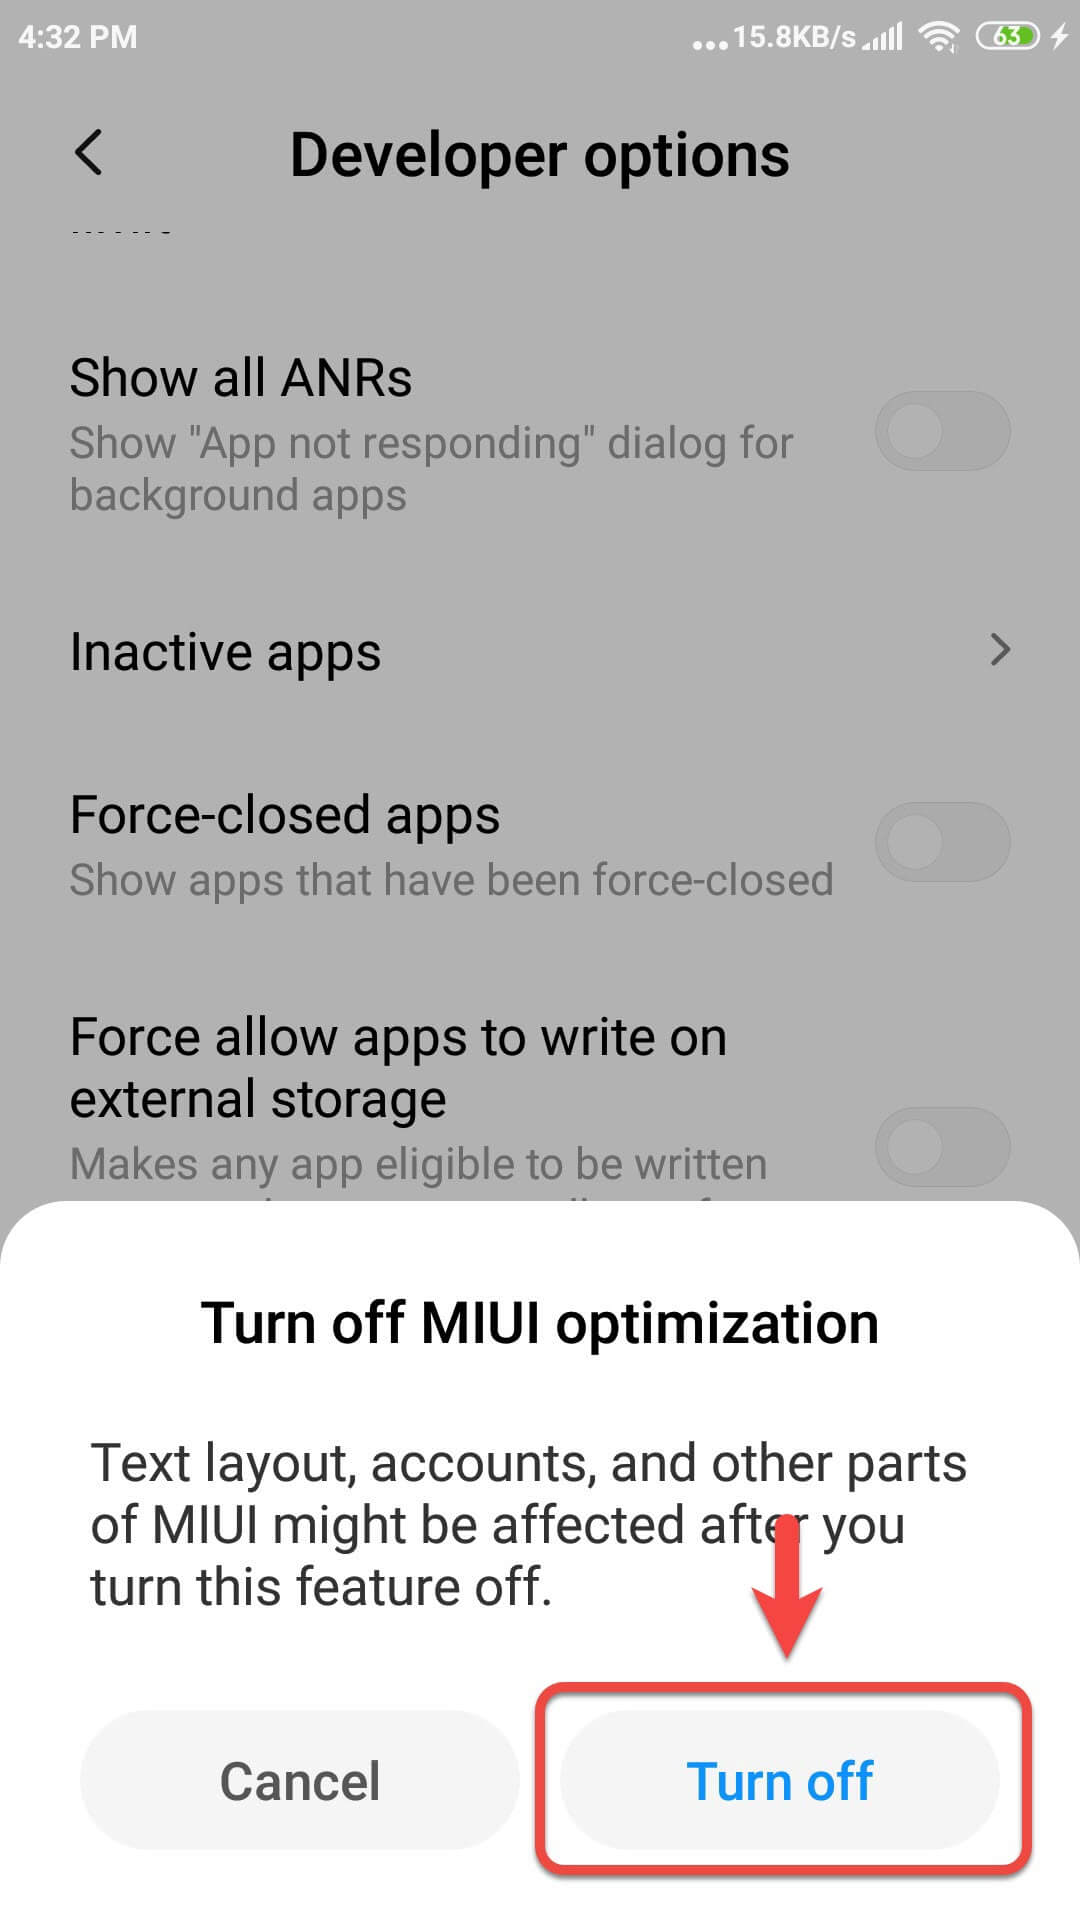 Enabled Optimization Is Miui Off Turn